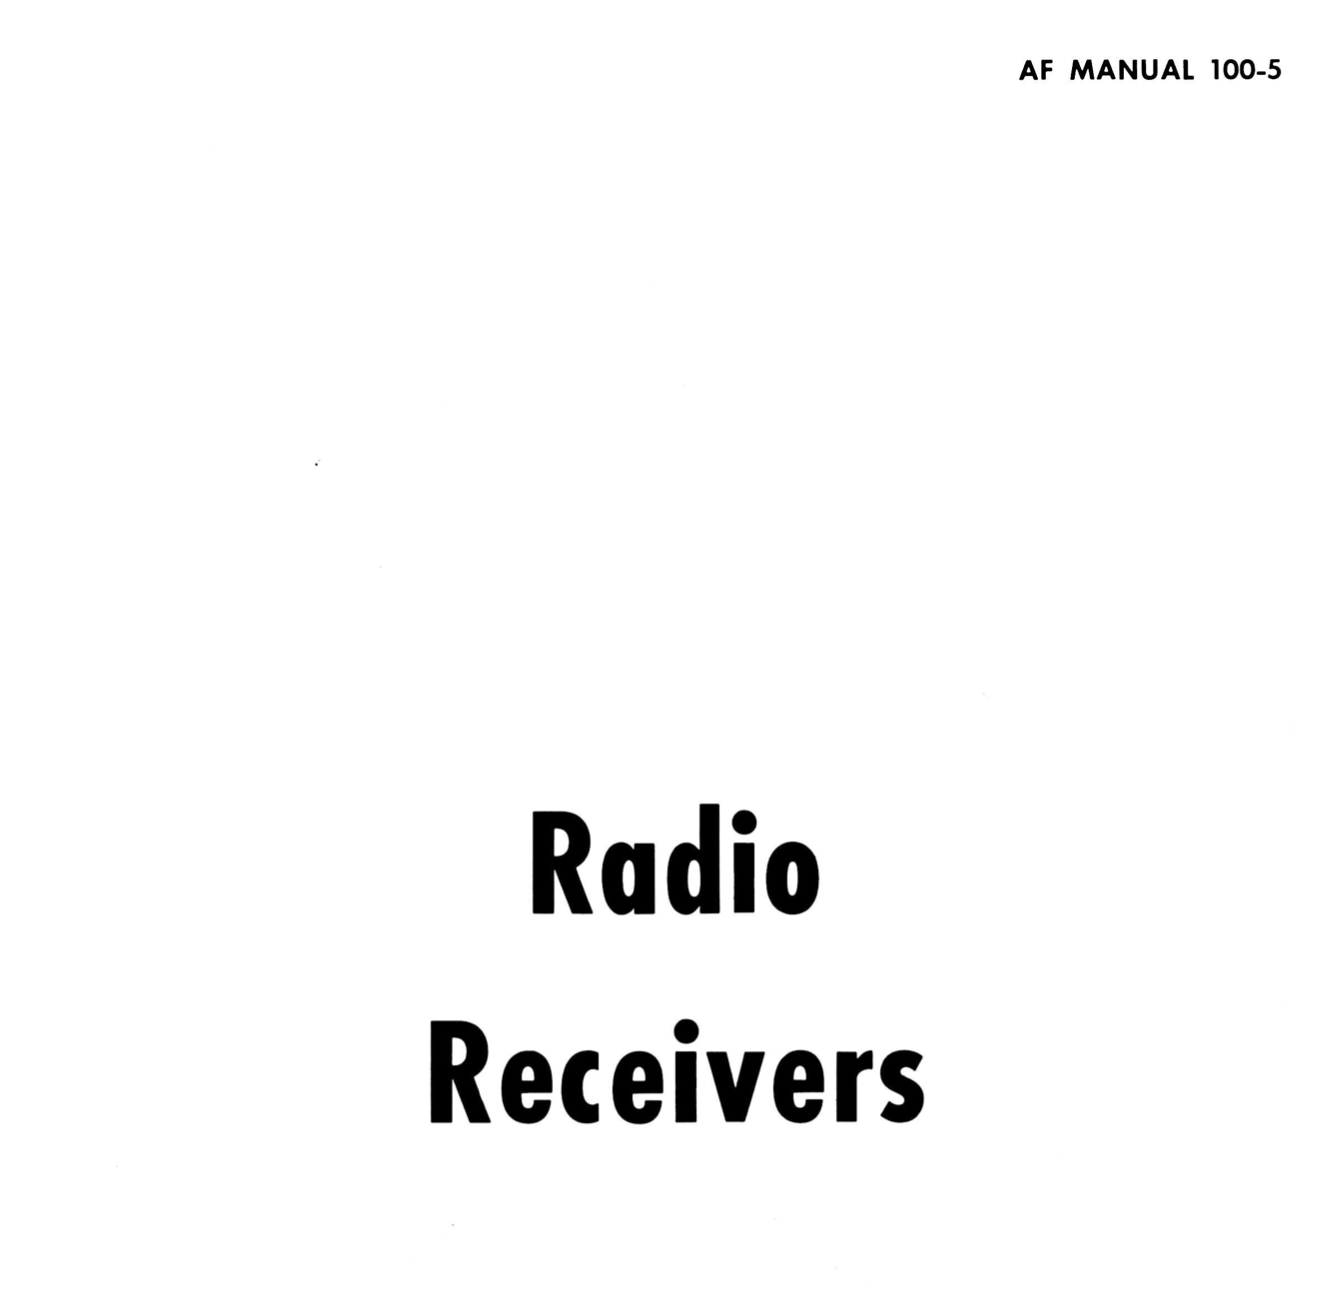 Radio Receivers Manual by Dept. USA Air Force (1956)